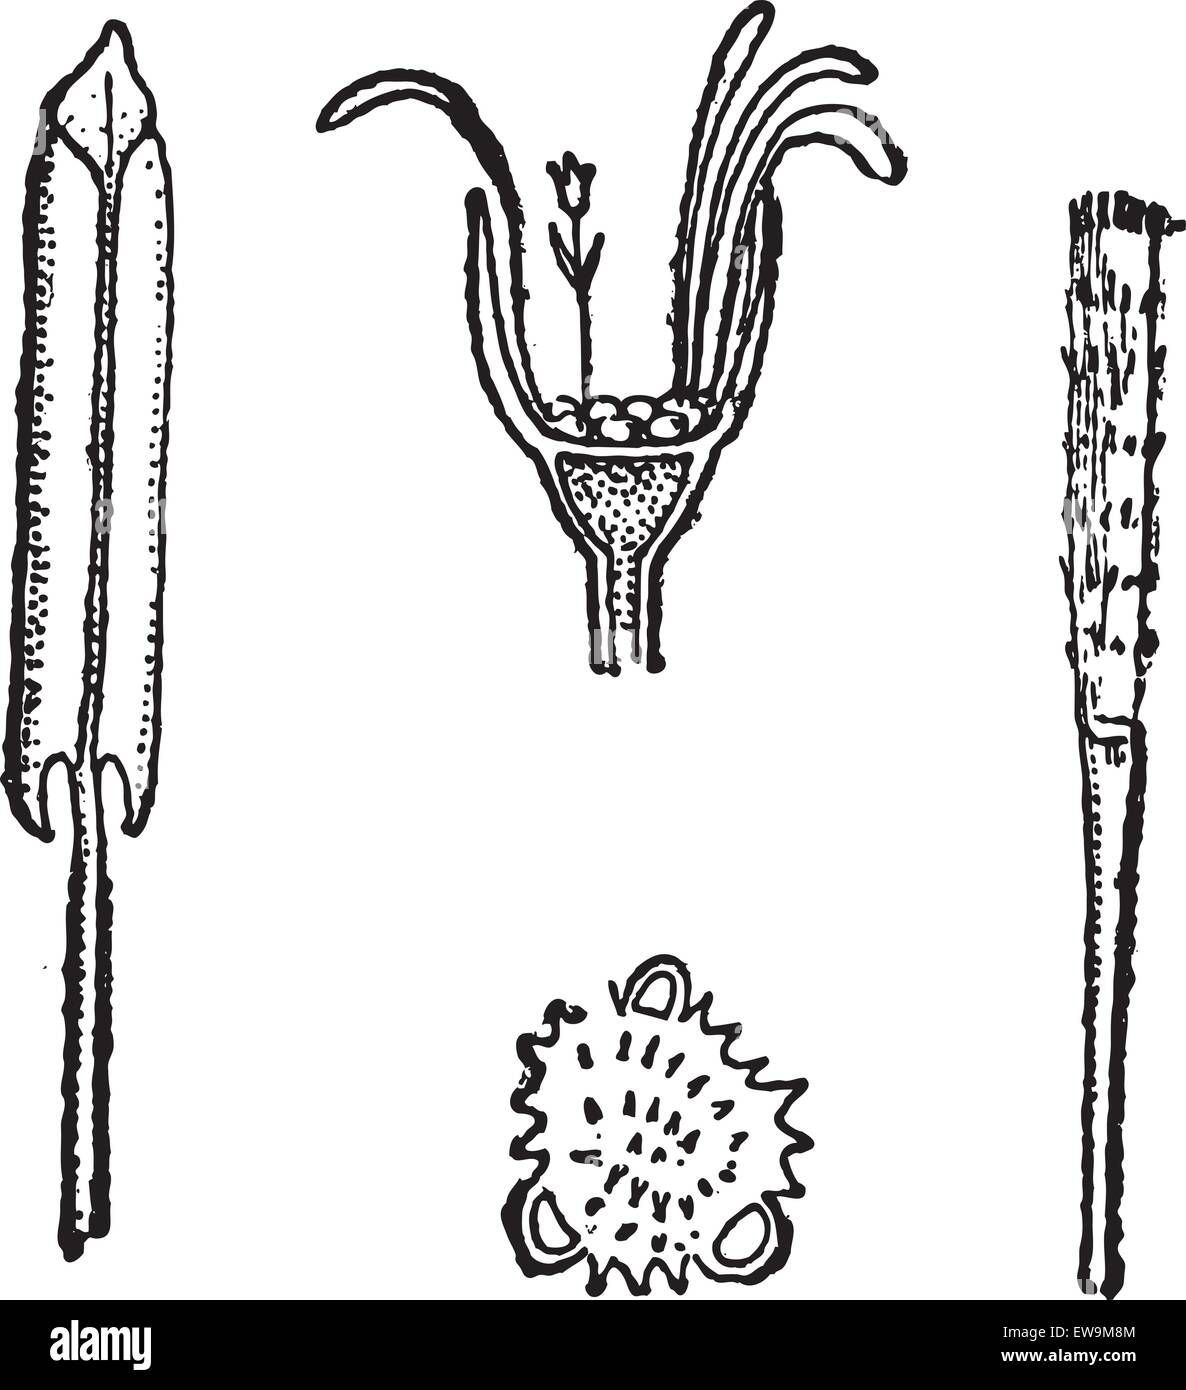 Coltsfoot or Tussilago farfara, showing (clockwise from left) petals, flower head, style, and pollen (enlarged), vintage engrave Stock Vector